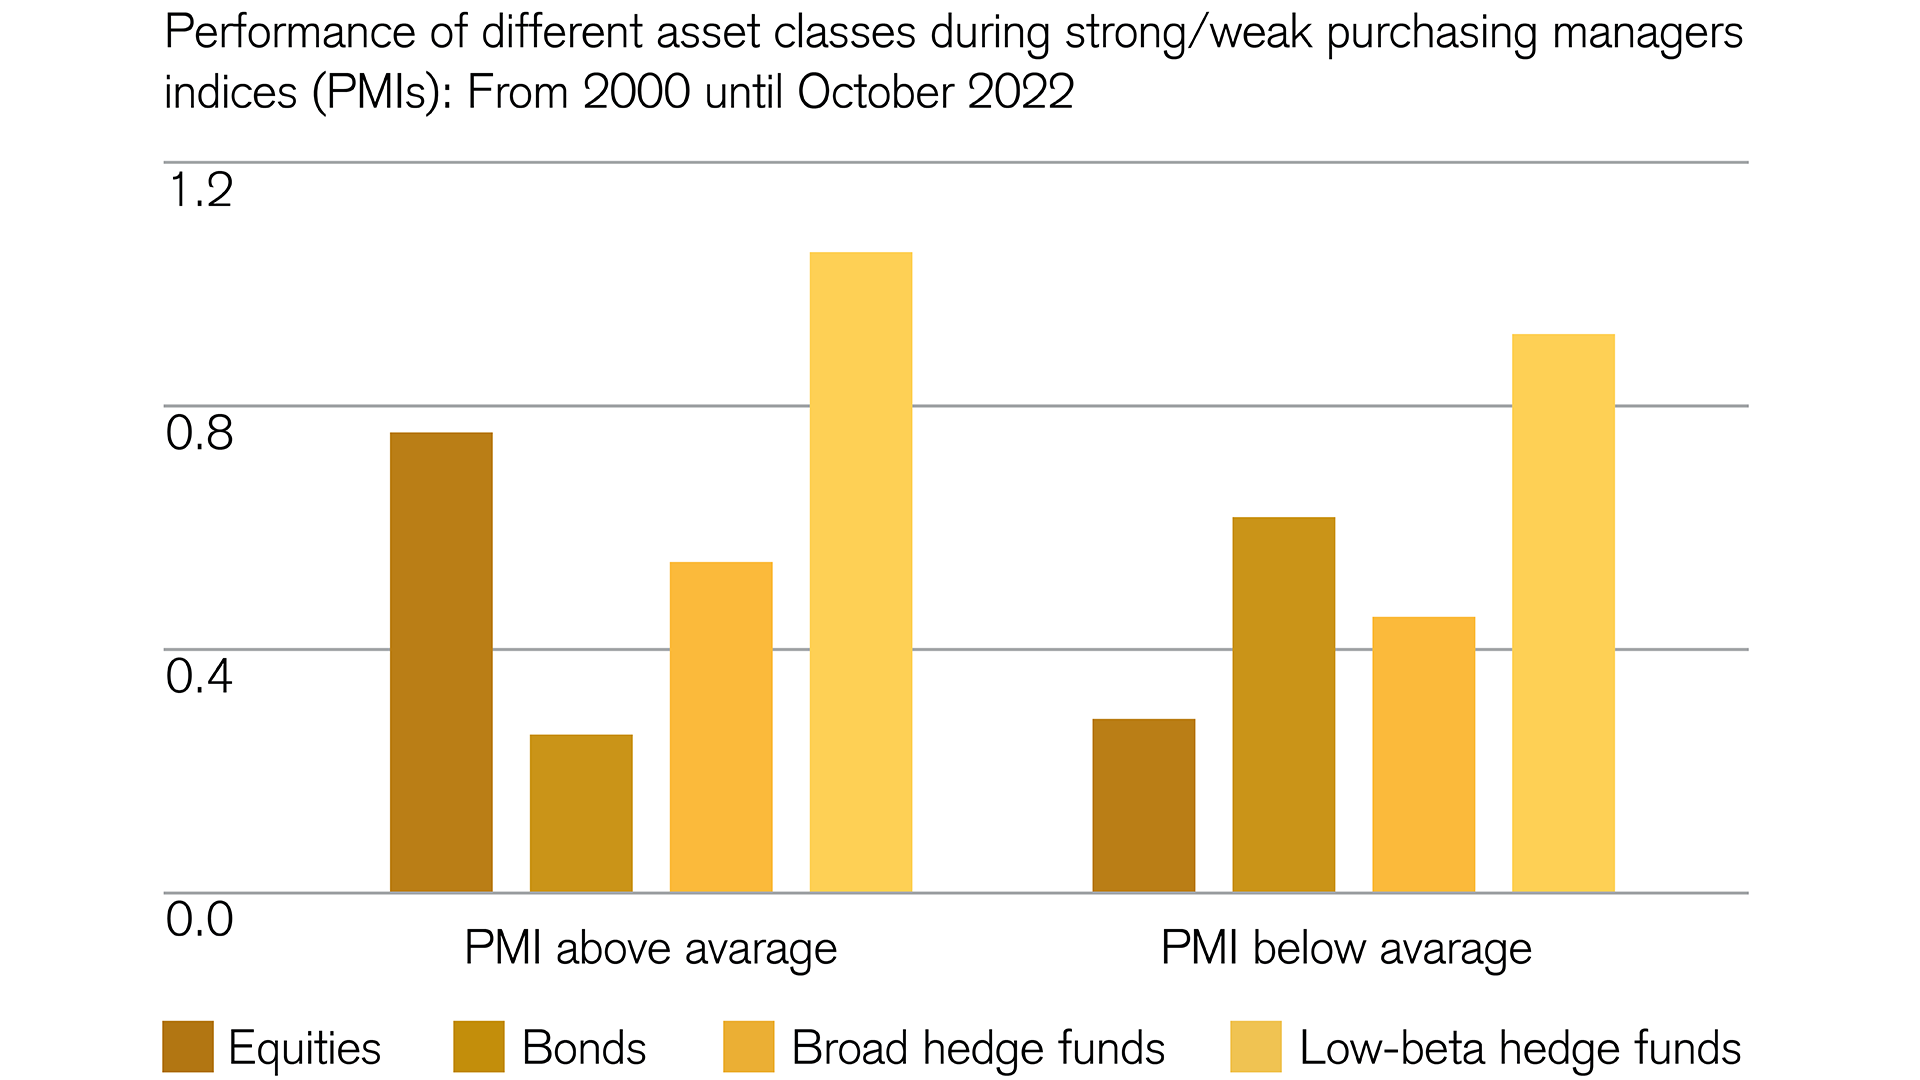 Performance comparison of different asset classes in good and difficult conditions